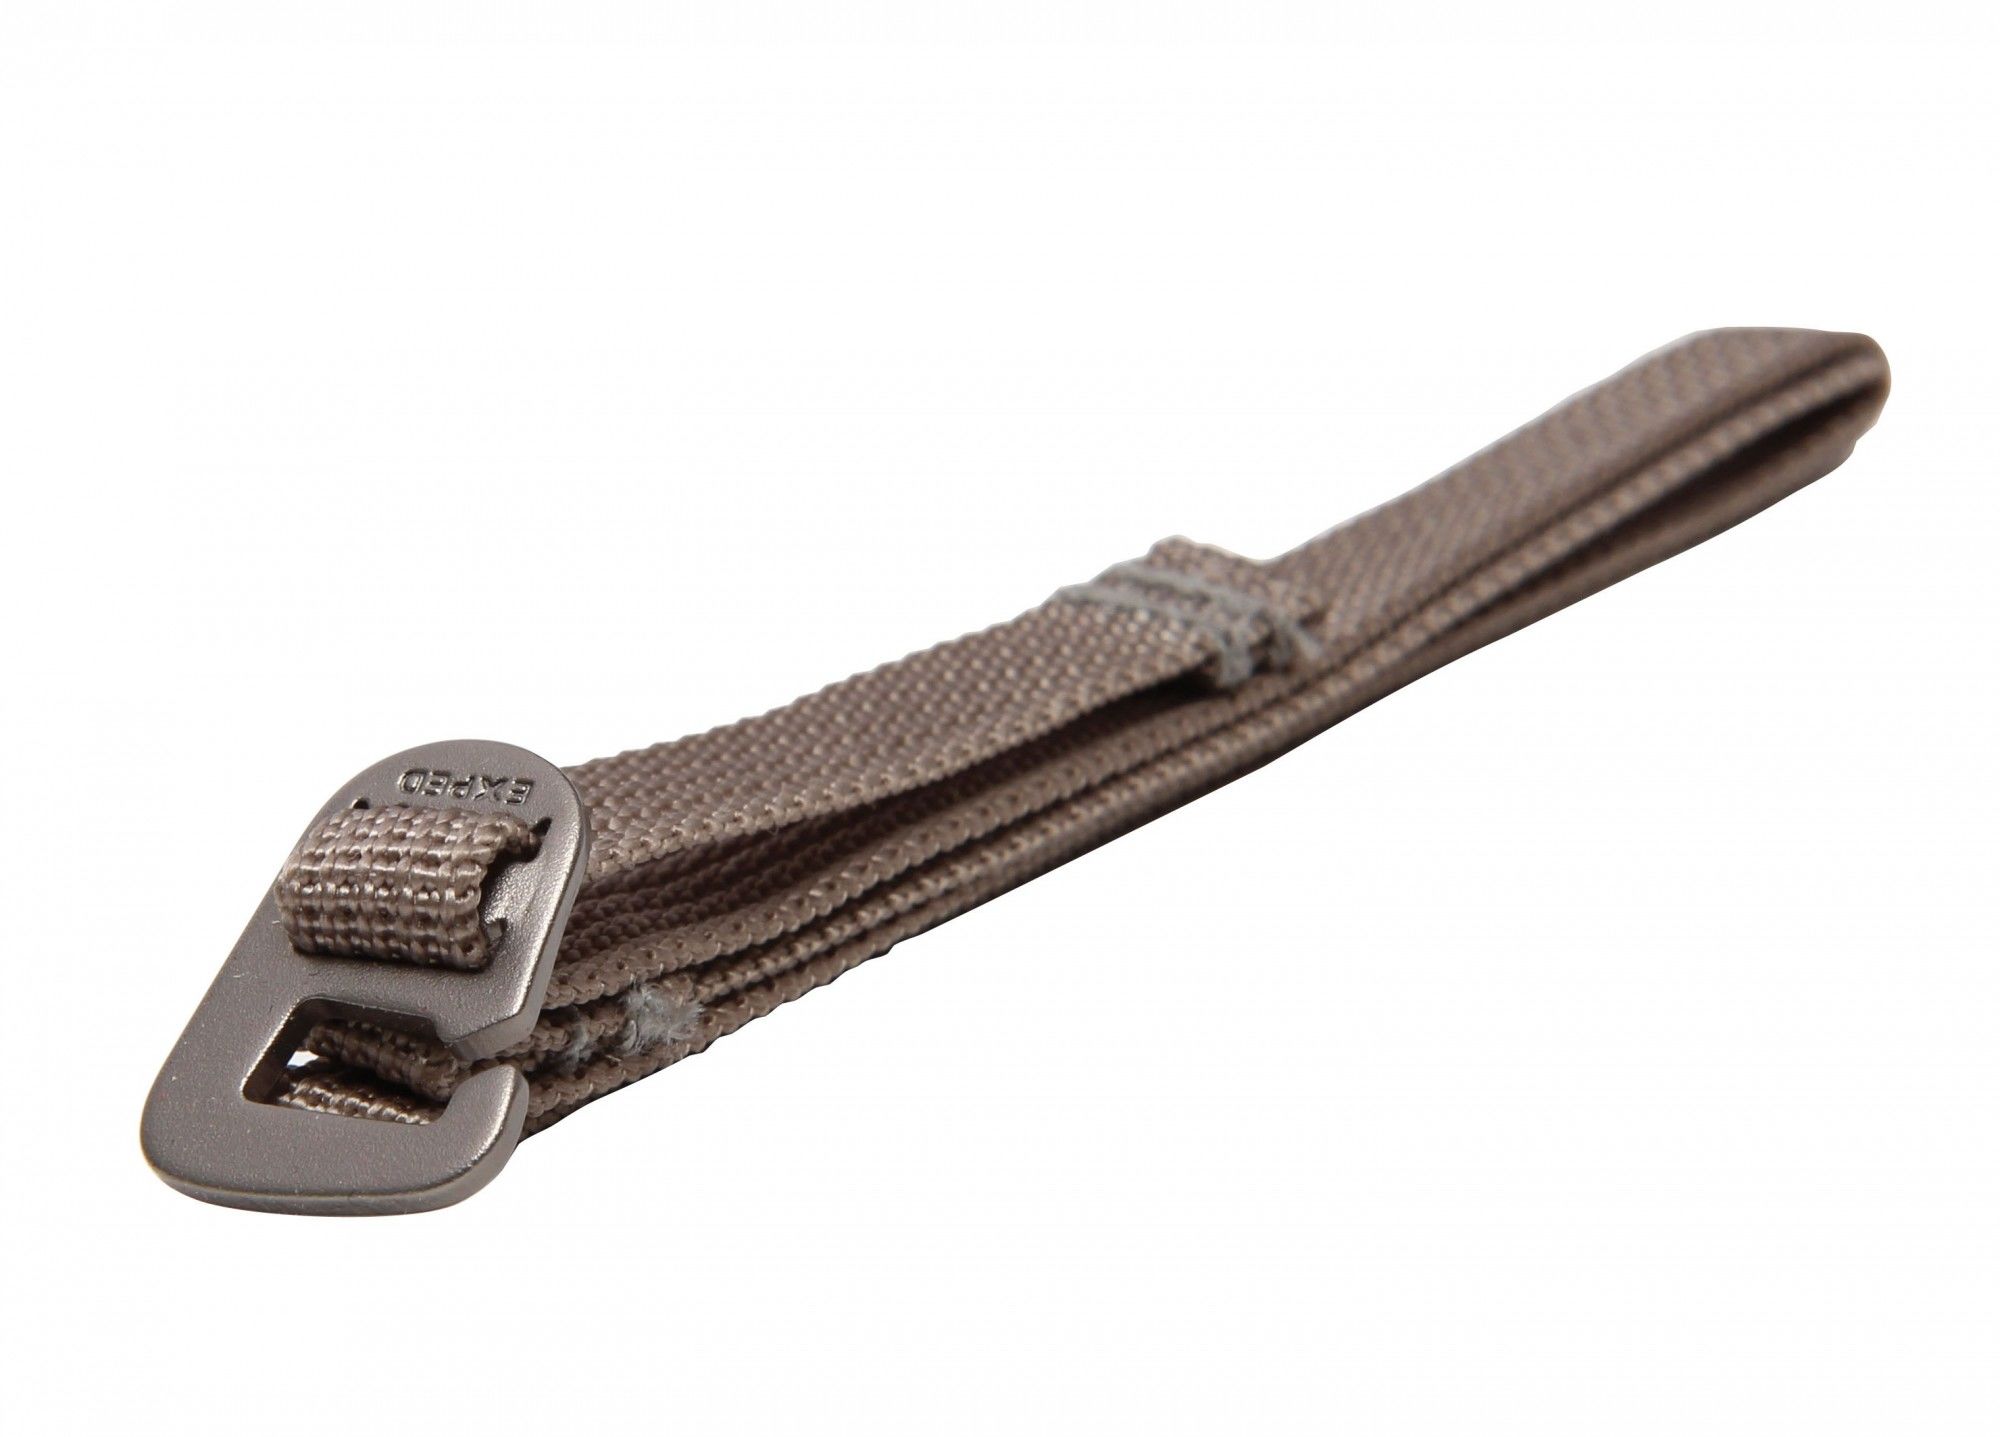 Exped Accessory Strap UL 60cm